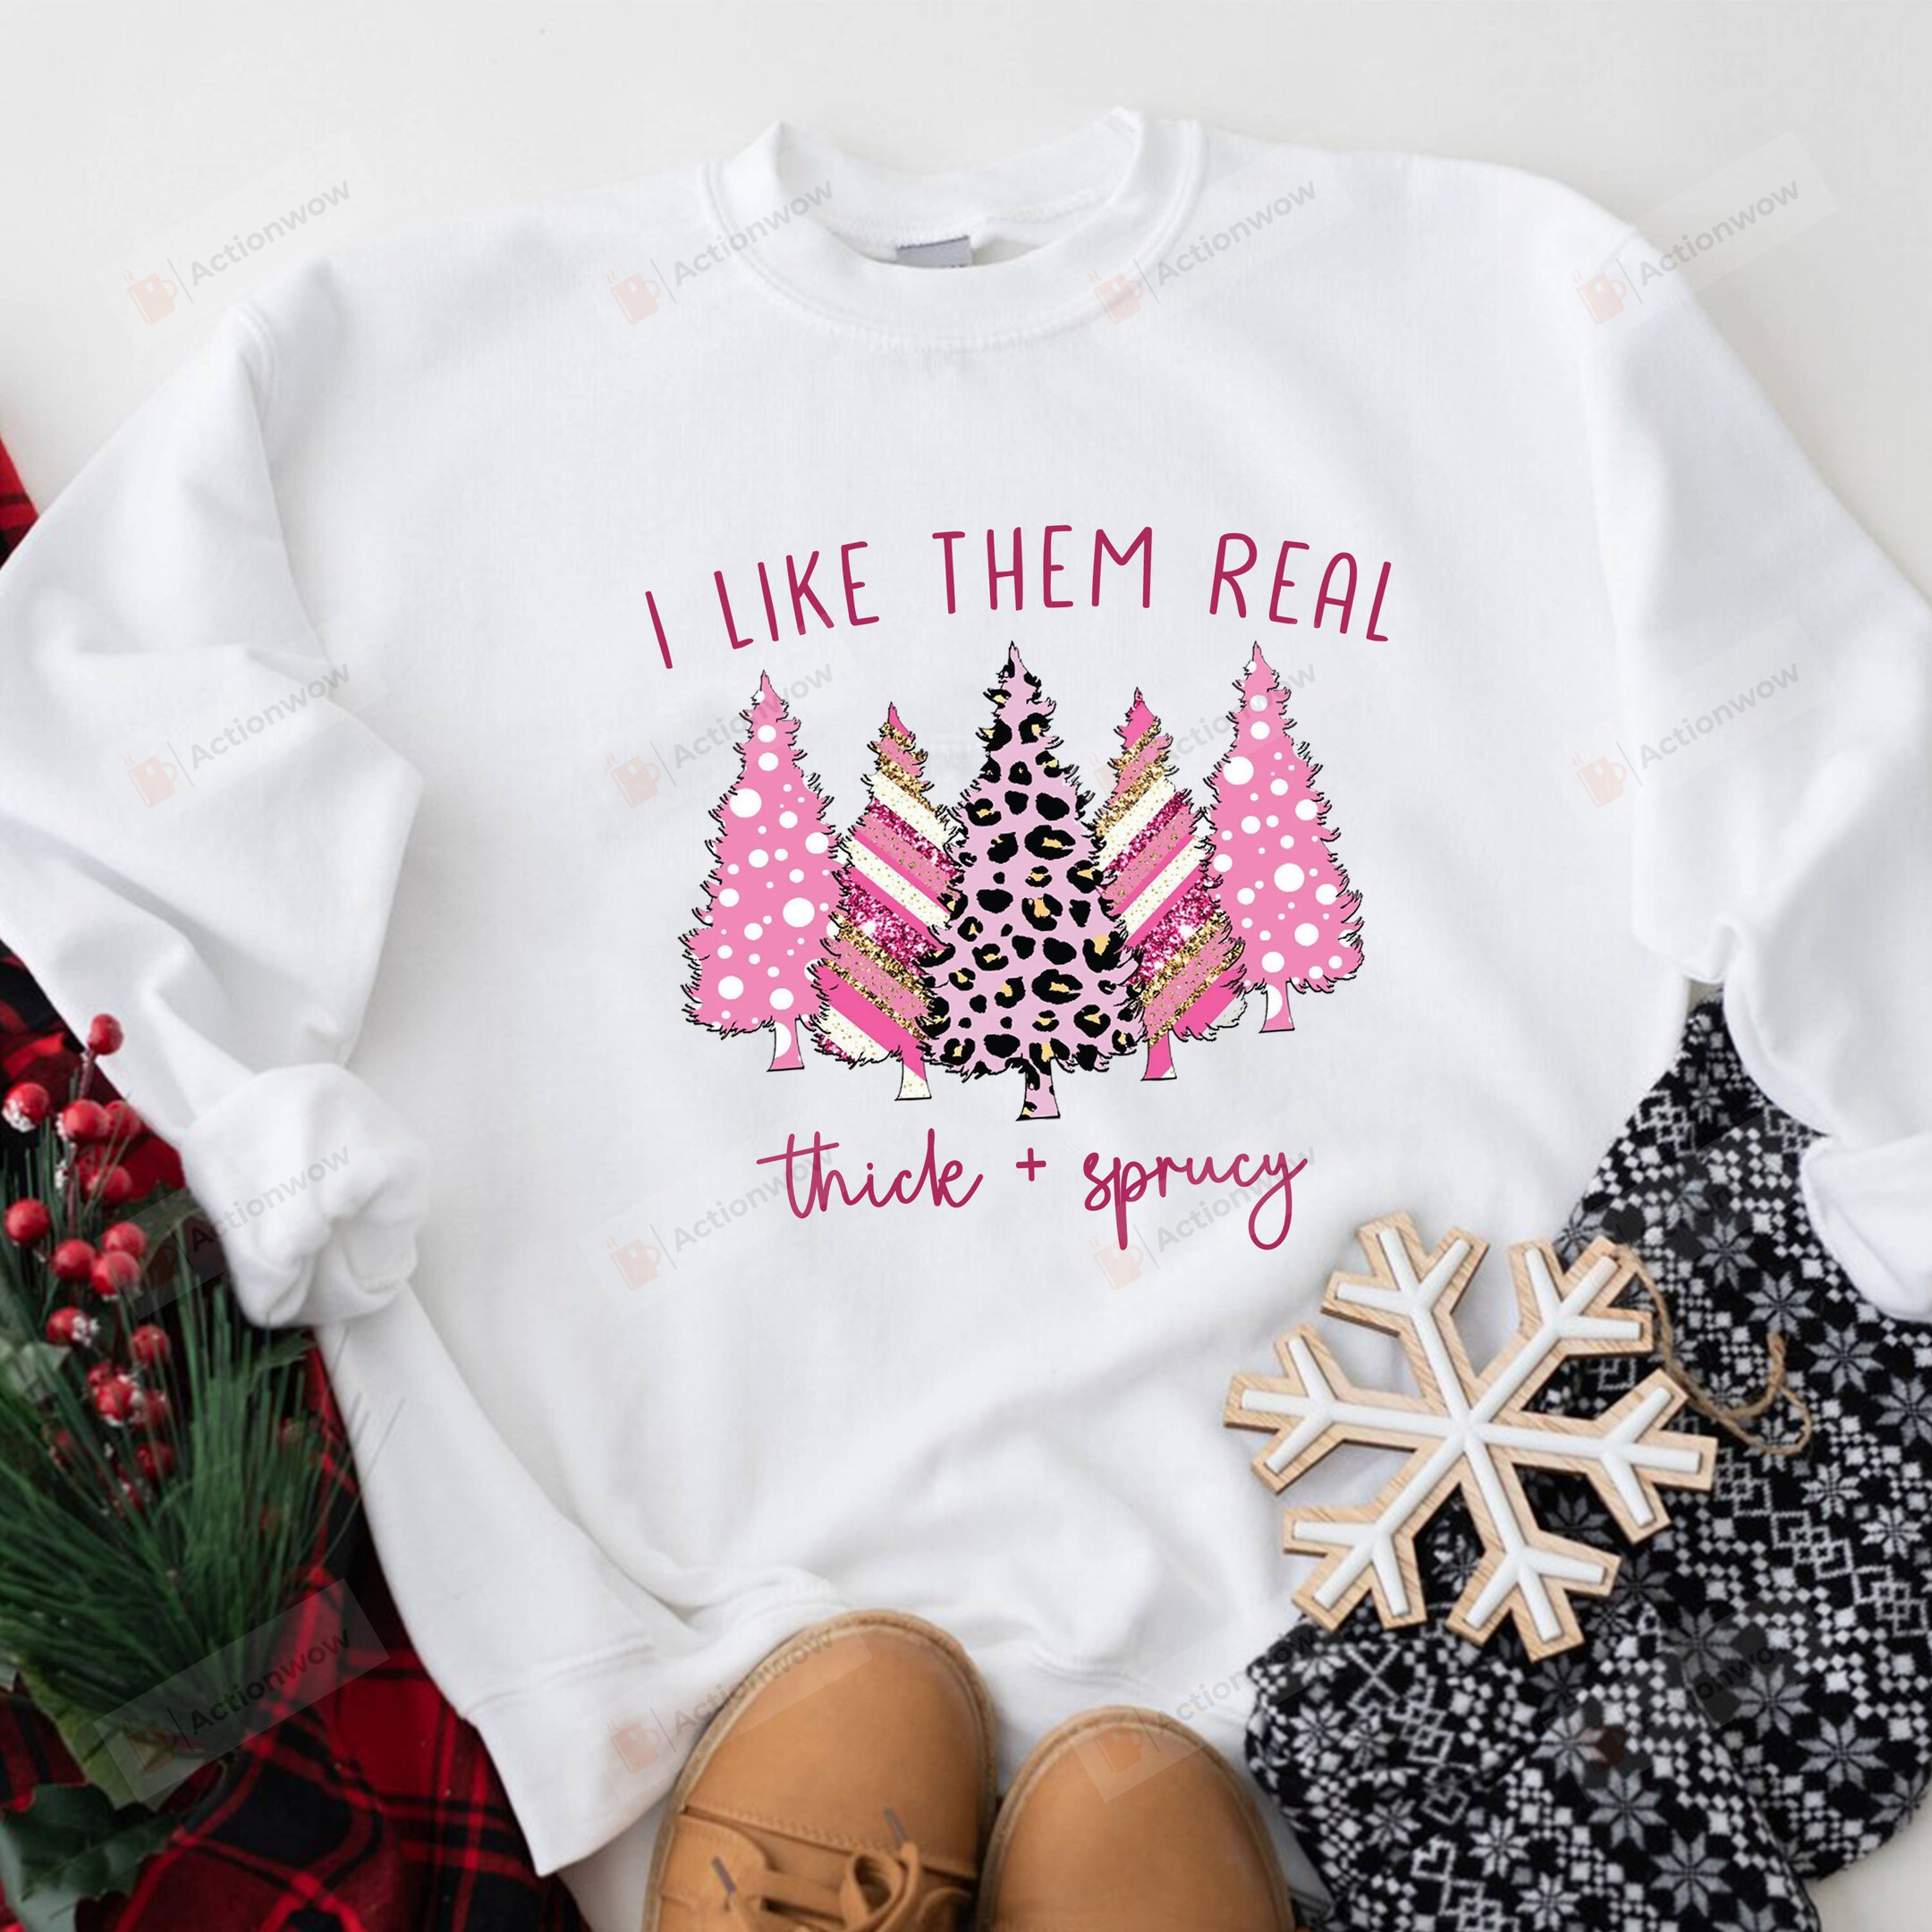 I Like Them Real Thick And Sprucey Sweatshirt, Christmas Tree Sweatshirt, Christmas Gifts For Women